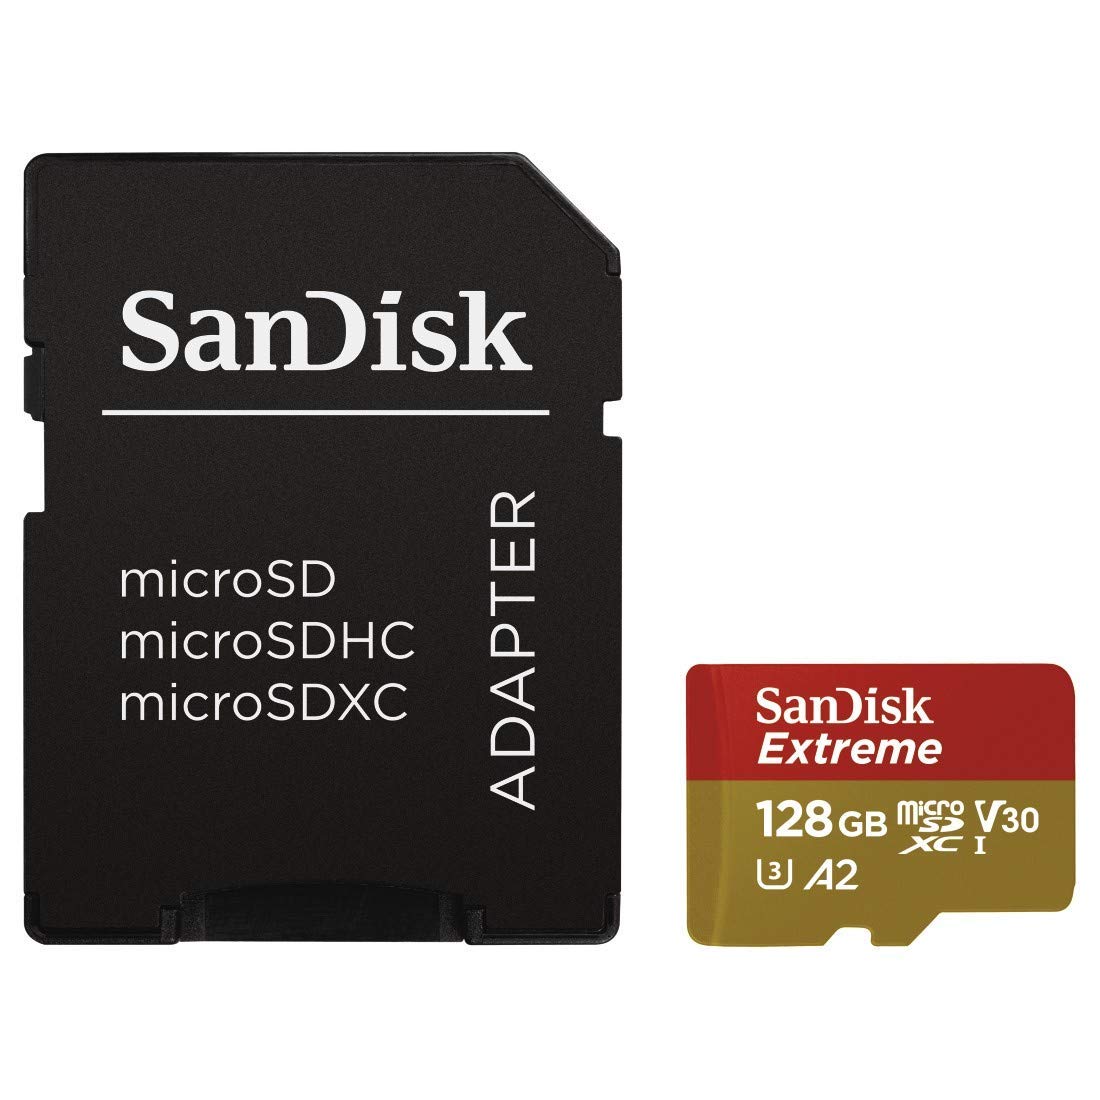 SanDisk Extreme 128 GB microSDXC Memory Card for Action Cameras and Drones with A2 App Performance up to 160 MB/s, Class 10, U3, V30isk Extreme 128GB microSDXC Memory Card for Action Cameras